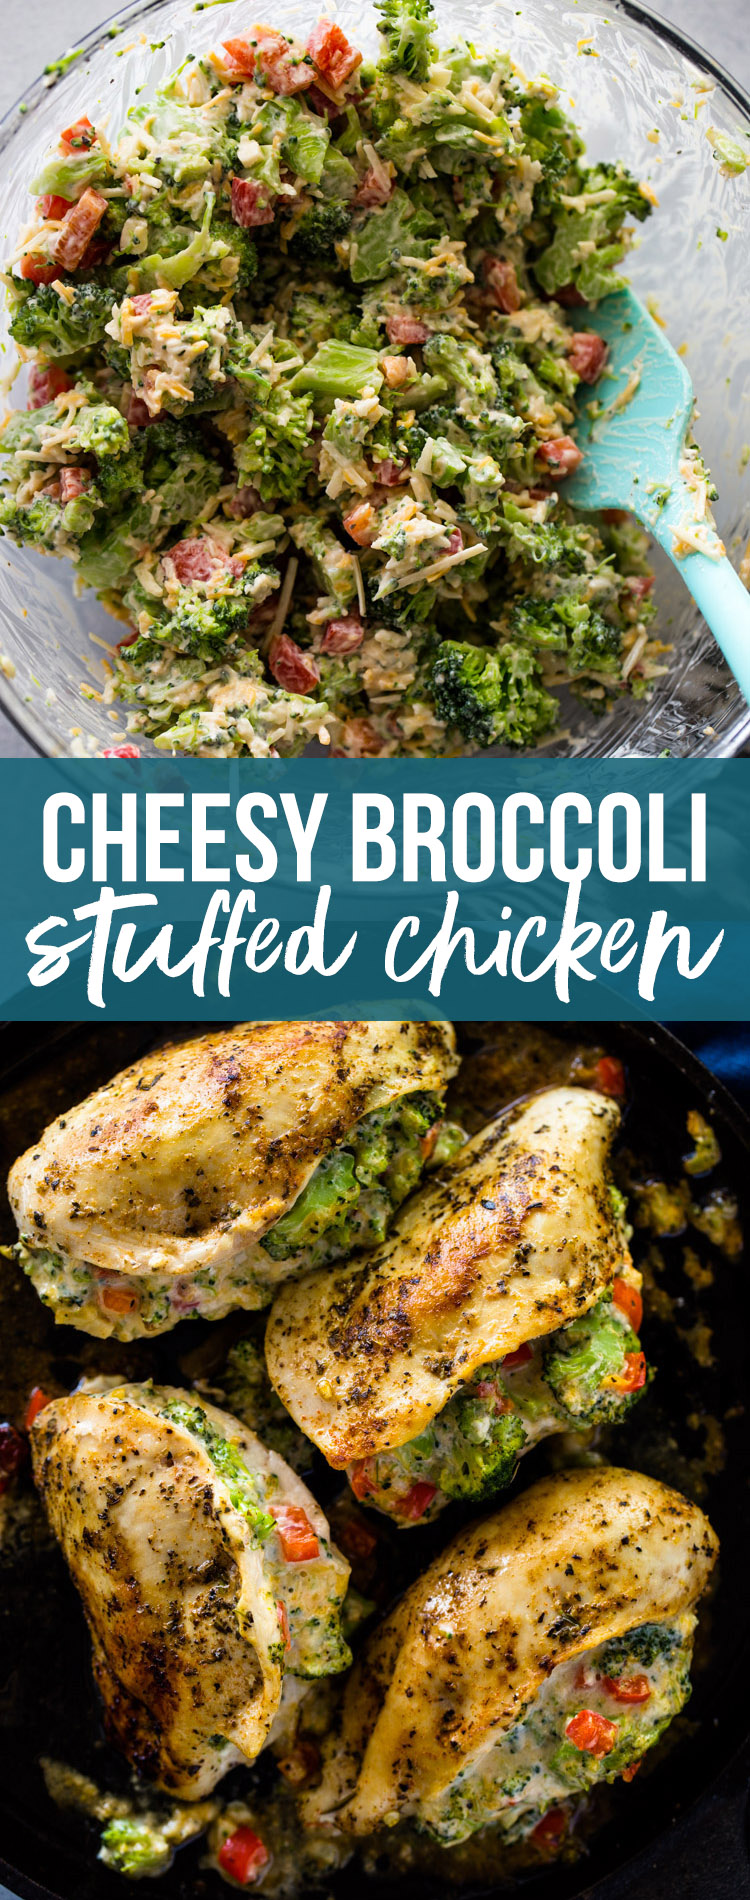 Tender Chicken breasts stuffed with broccoli, parmesan, cheddar, and cream cheese. This quick flavor-packed meal is bursting with flavor and texture and makes a delicious low-carb dinner. 